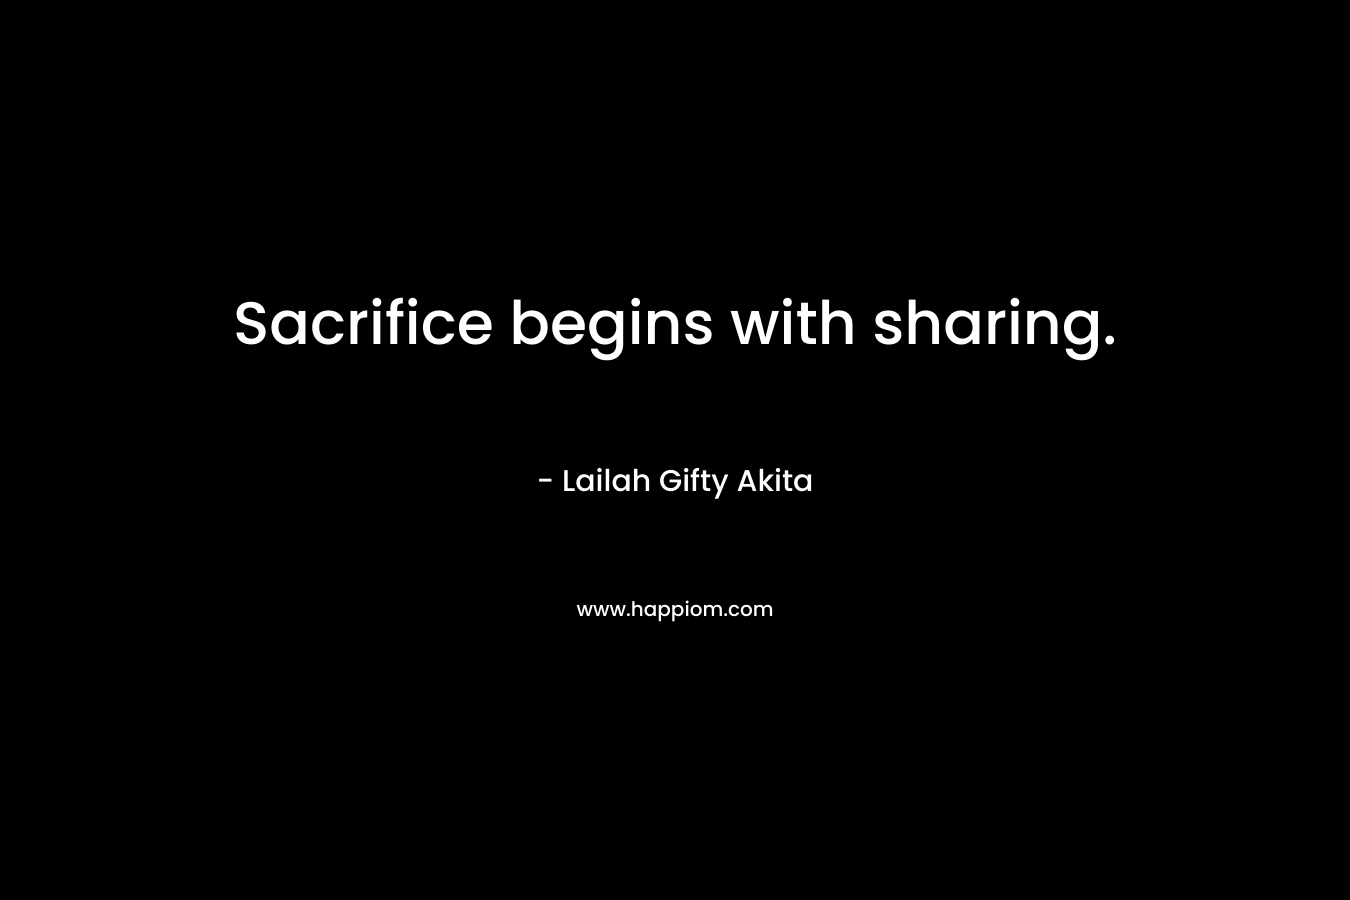 Sacrifice begins with sharing.